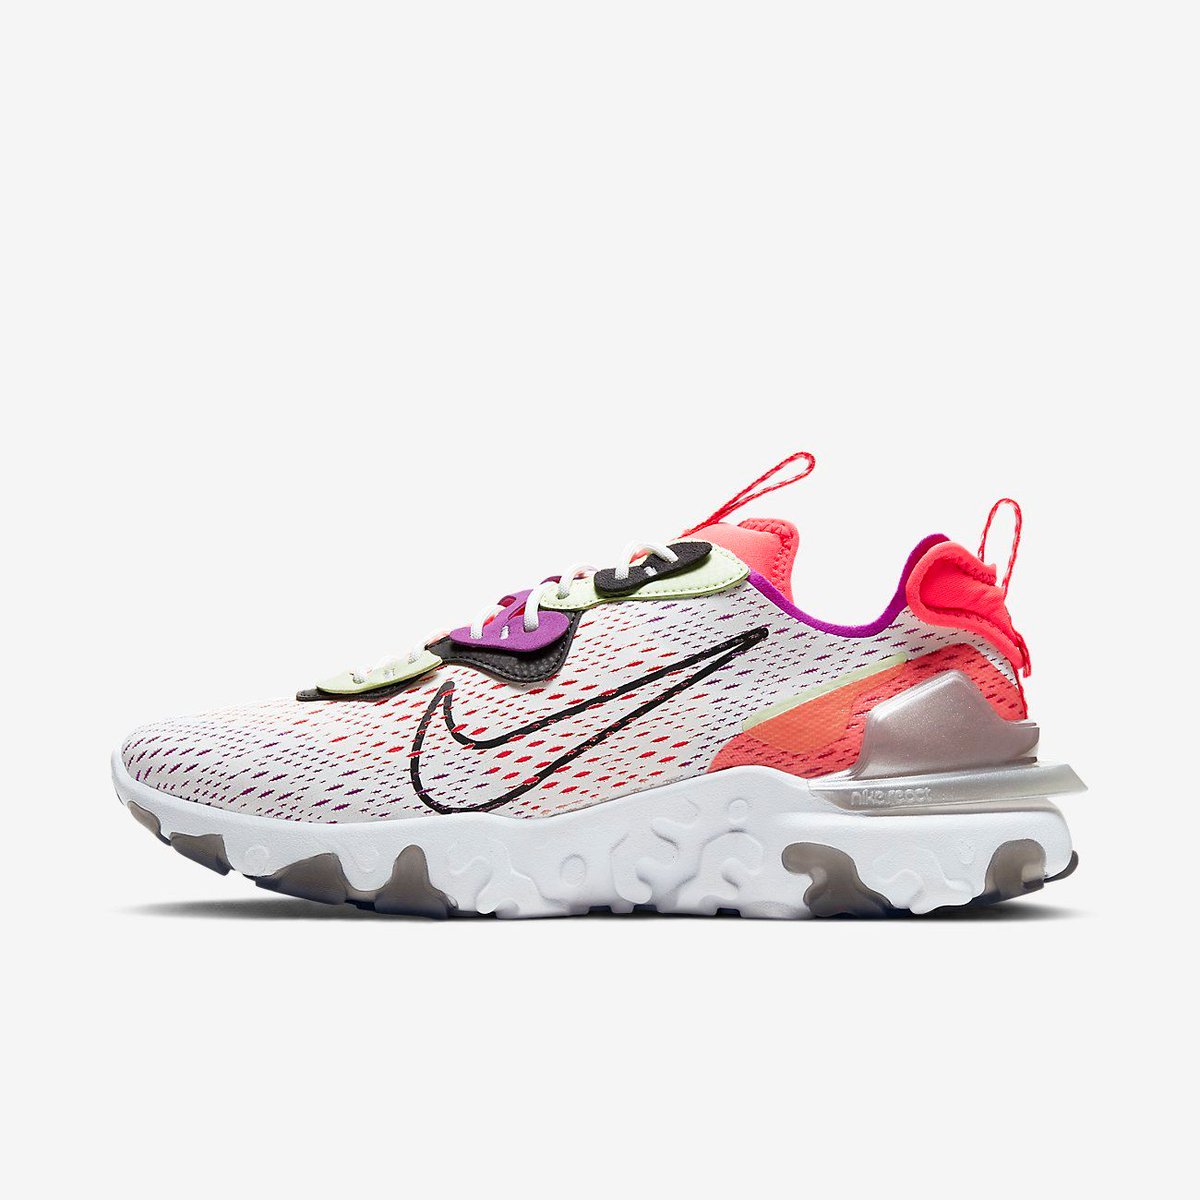 NEW Nike React Vision colorways Eastbay 